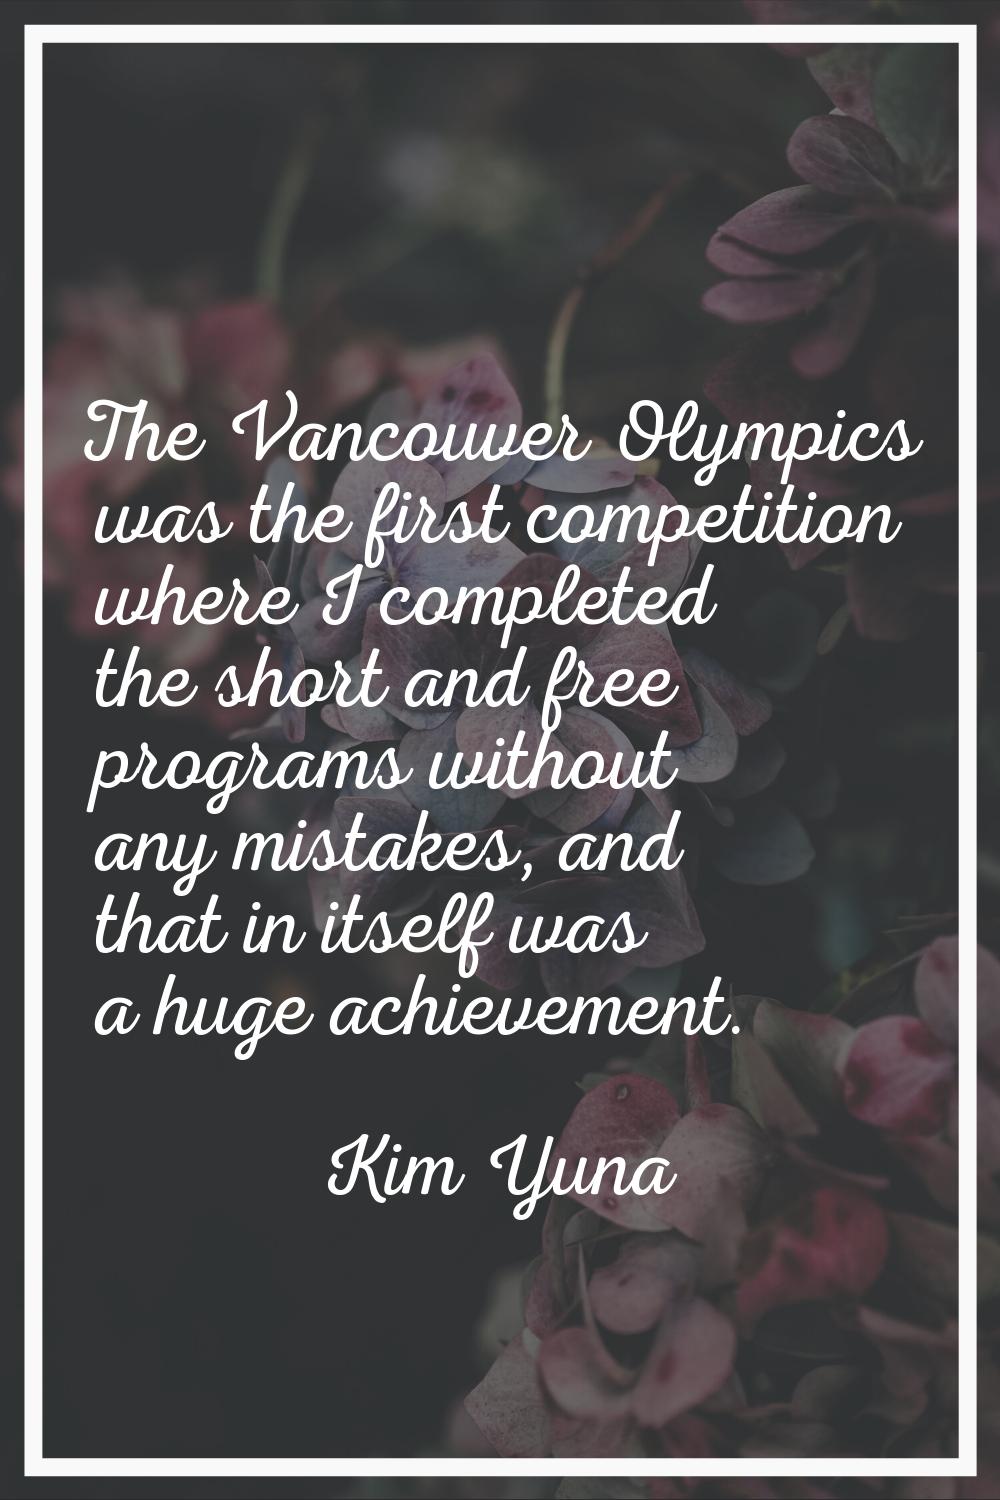 The Vancouver Olympics was the first competition where I completed the short and free programs with